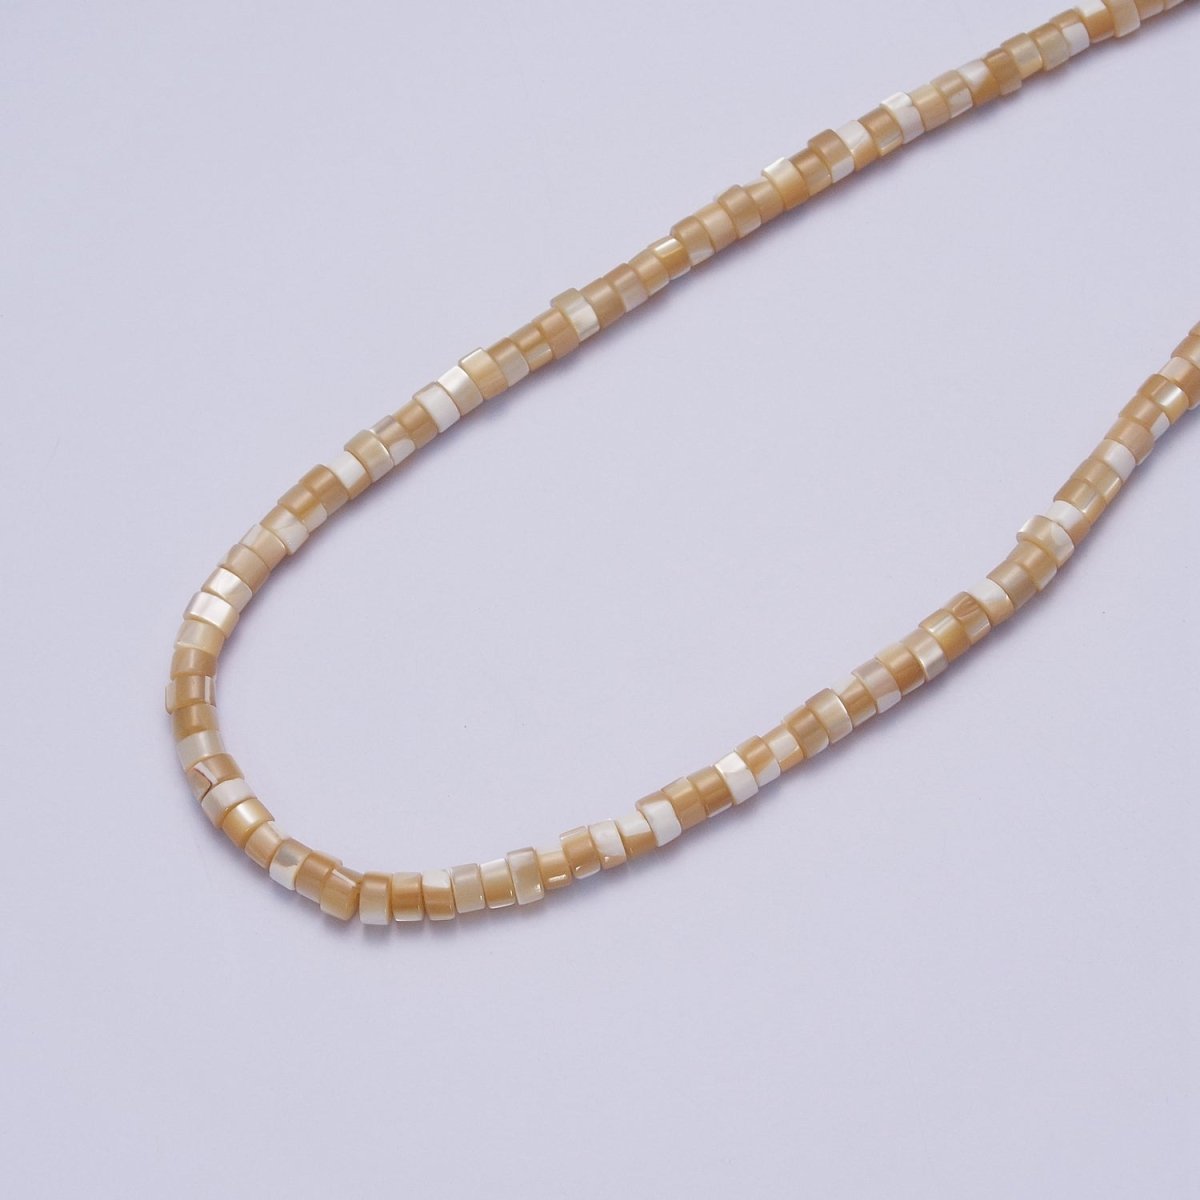 2X4MM Natural Heishi Tube Shape Gemstone Bead Healing Energy Loose Beads DIY Jewelry Making Design for Bracelet Necklace Earing AAA Quality | WA-1224 to WA-1237 Clearance Pricing - DLUXCA